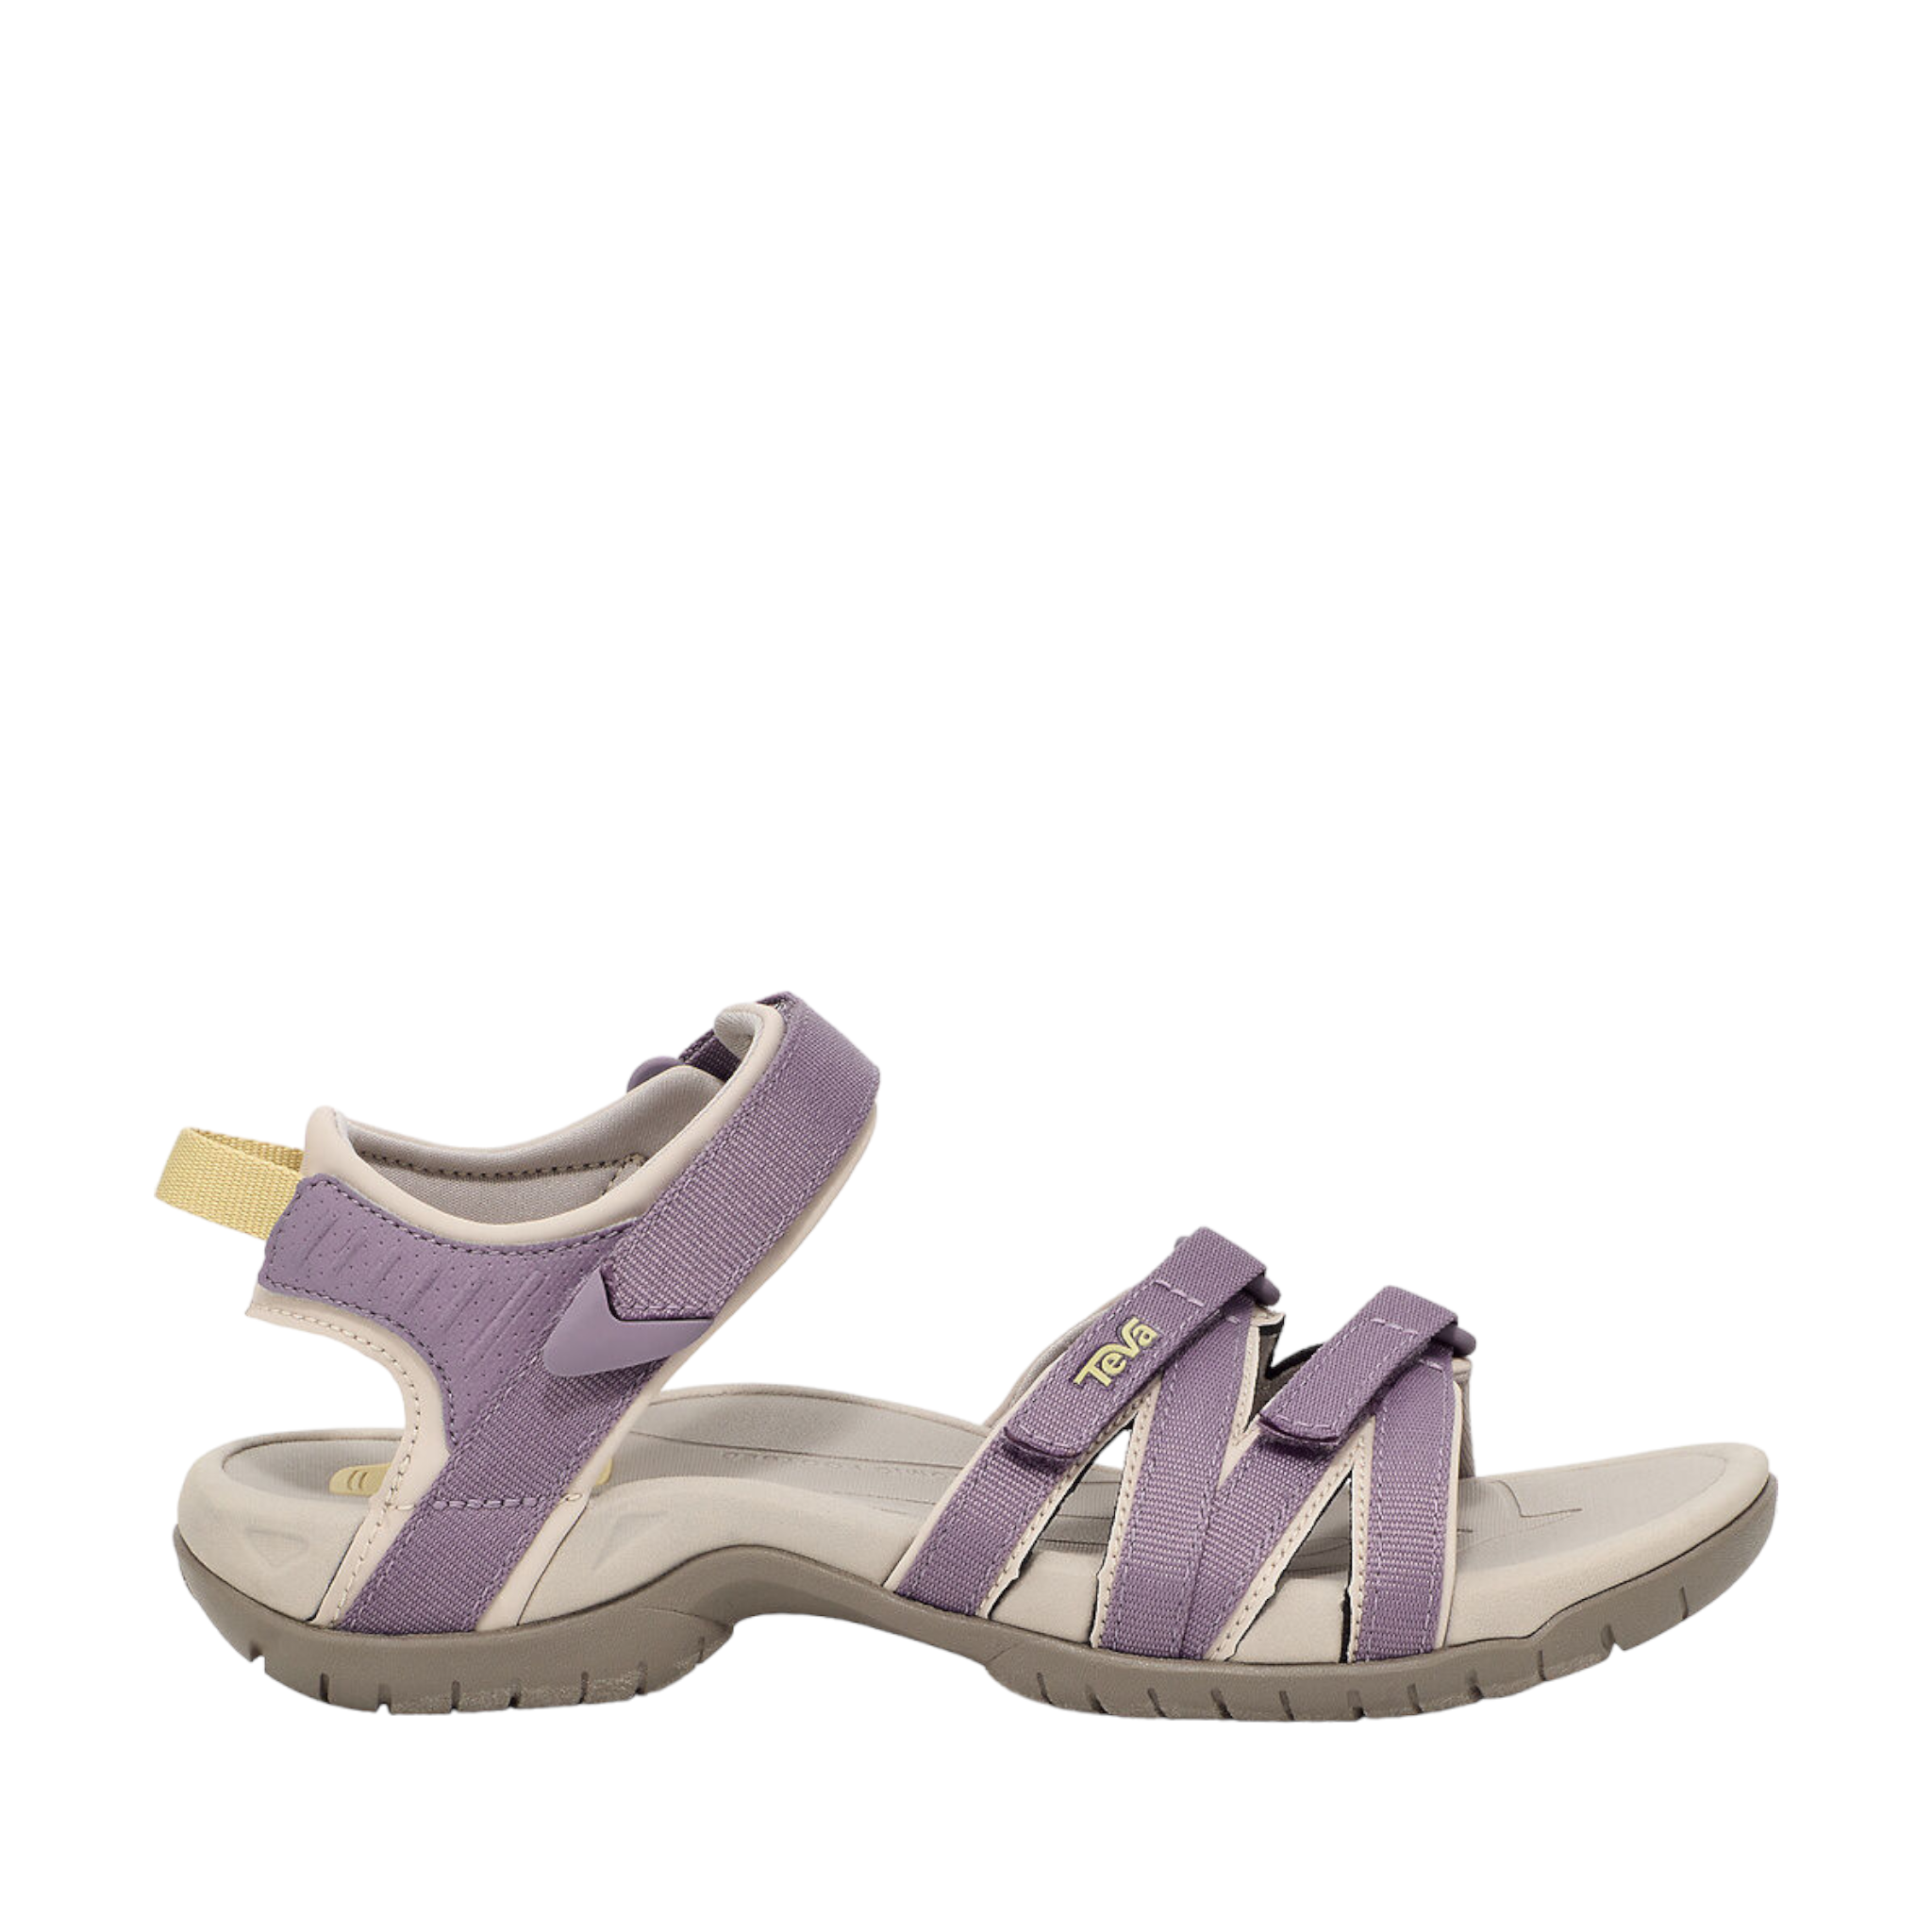 Shop W Tirra - with shoe&amp;me - from Teva - Sandals - Sandals, Summer, Womens